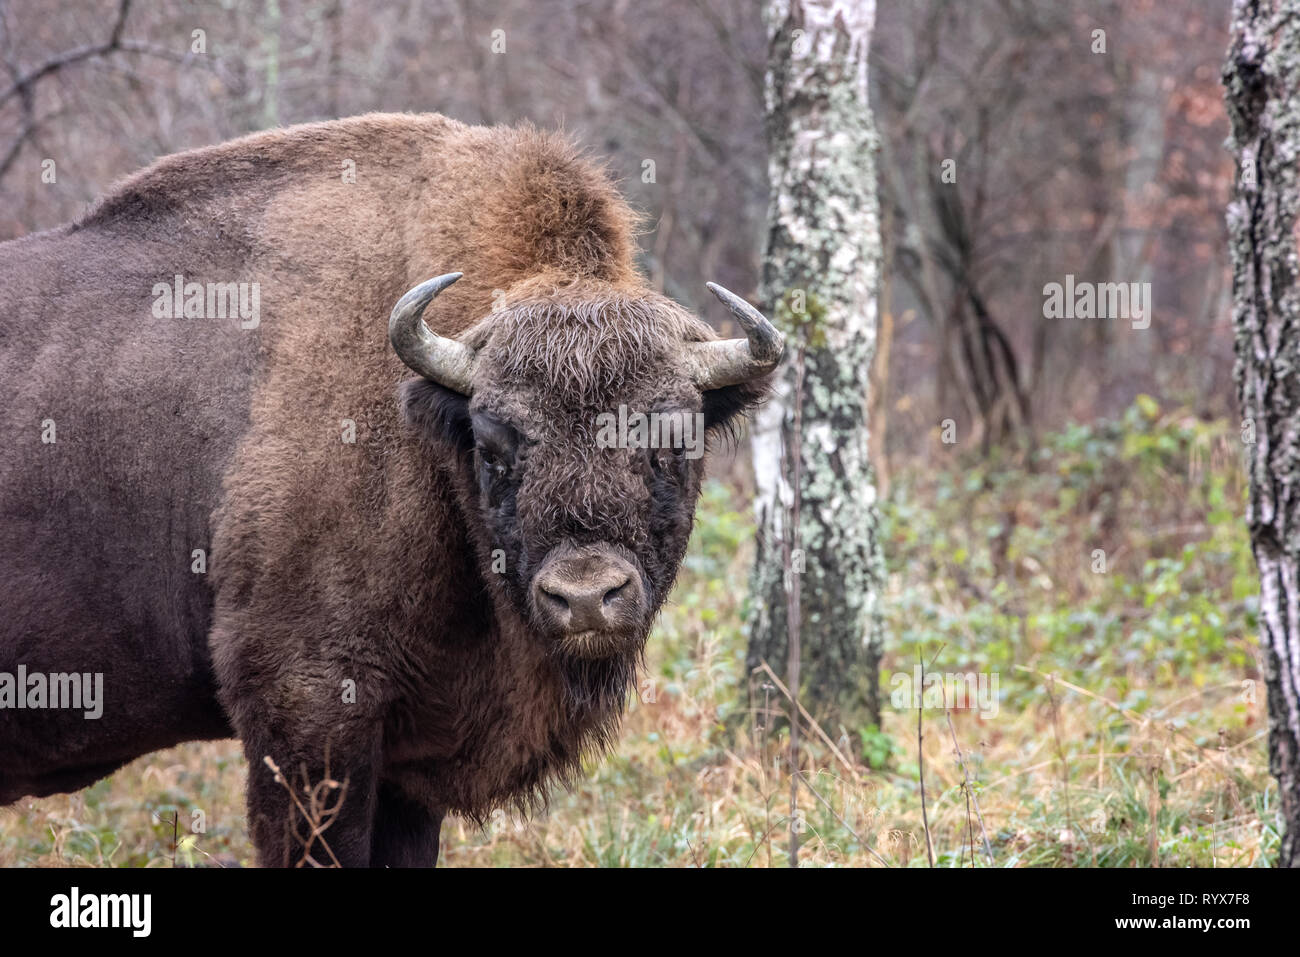 close up portrait of wild european bison (bison bonasus). Details of the head with big horns and thick brown fur. Vulnerable species. Wisent in forest Stock Photo